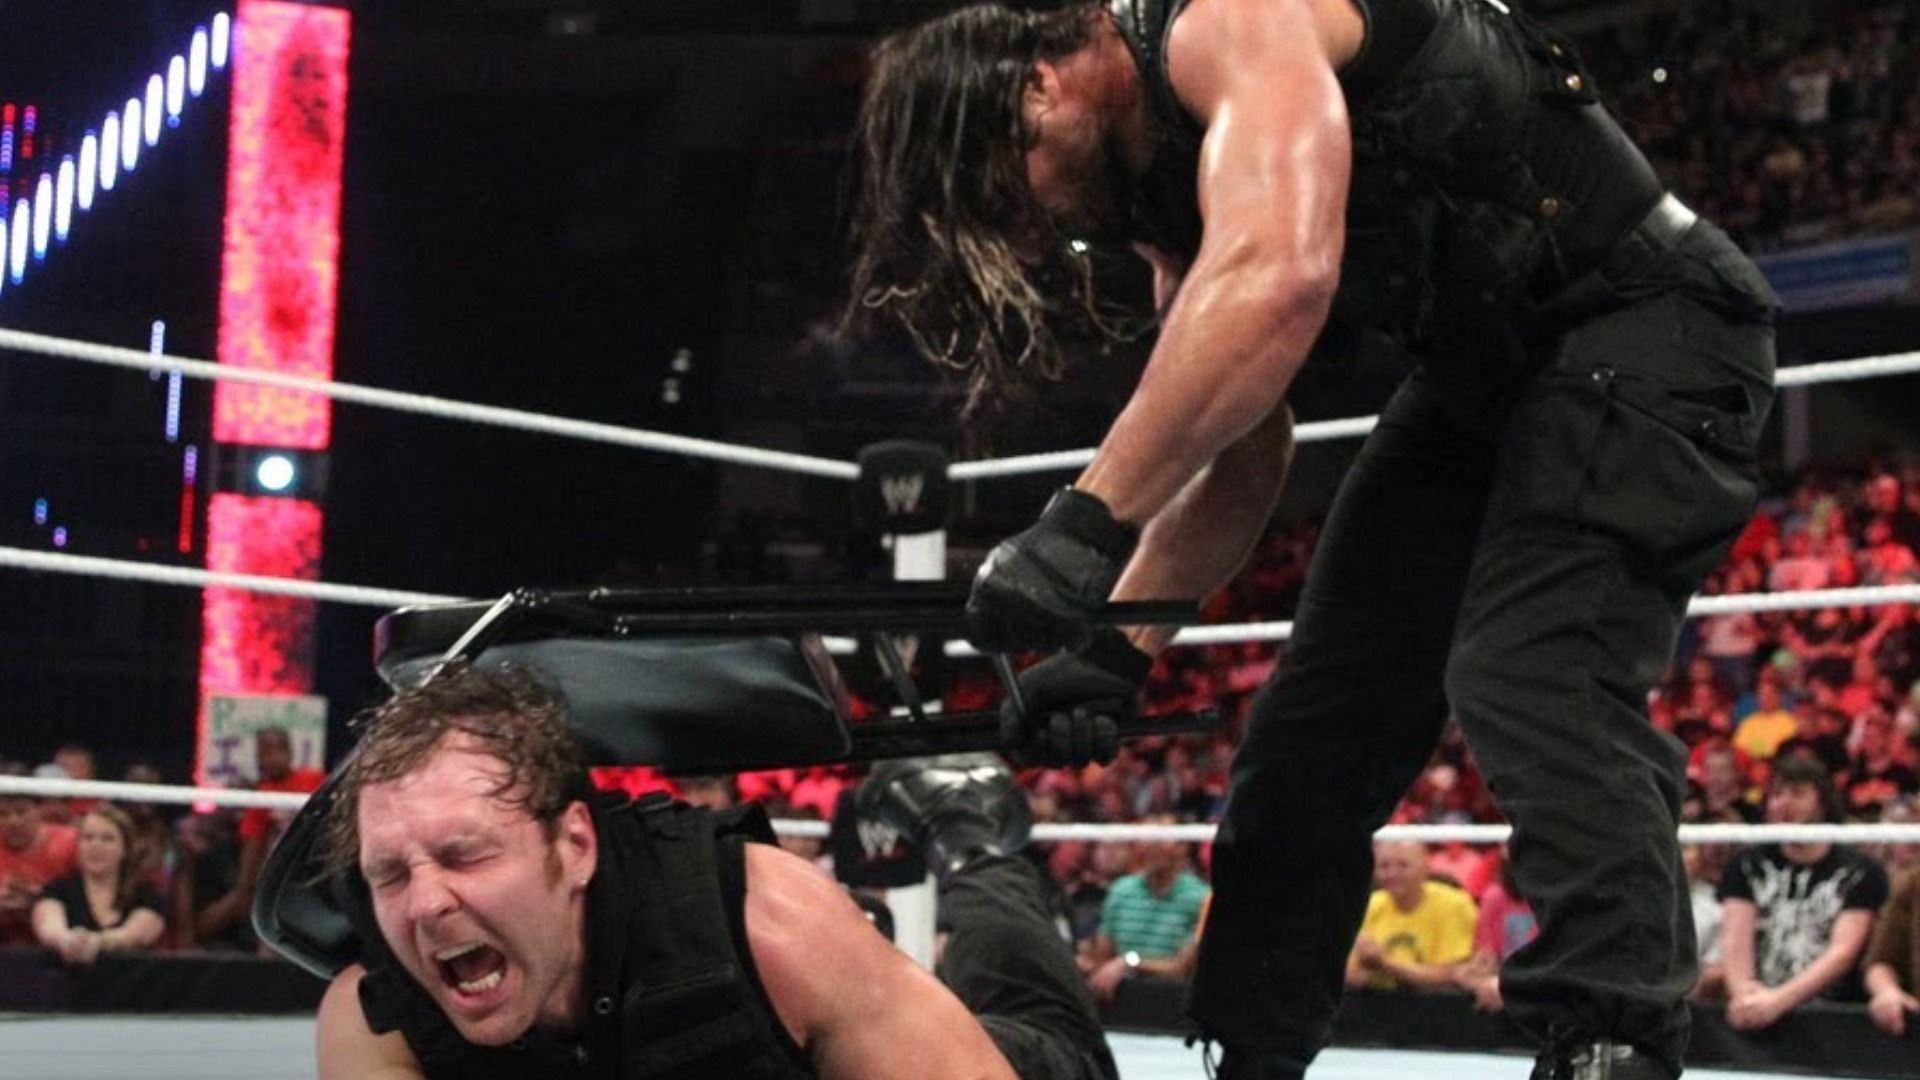 Seth Rollins attacks Dean Ambrose with a steel chair. WWE RAW (June 2, 2014)